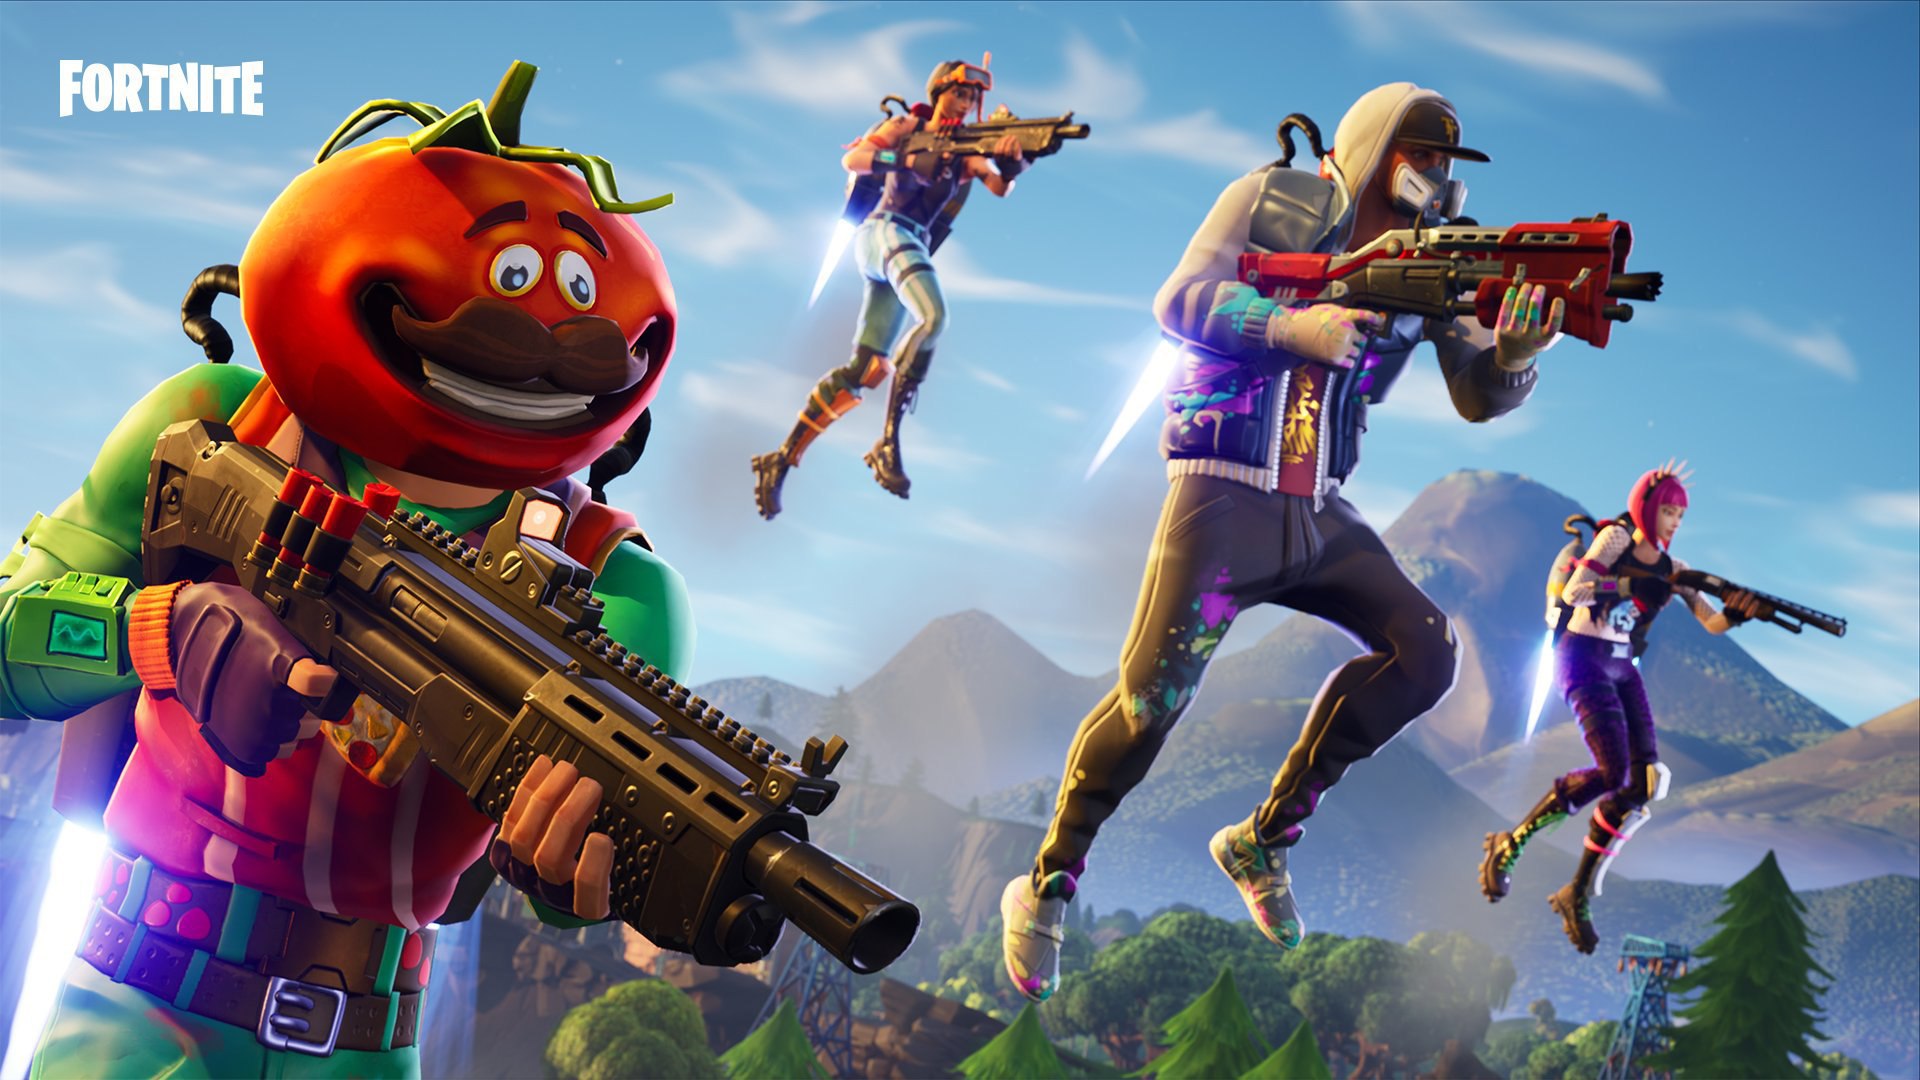 How To Redeem A Code In Fortnite Dot Esports